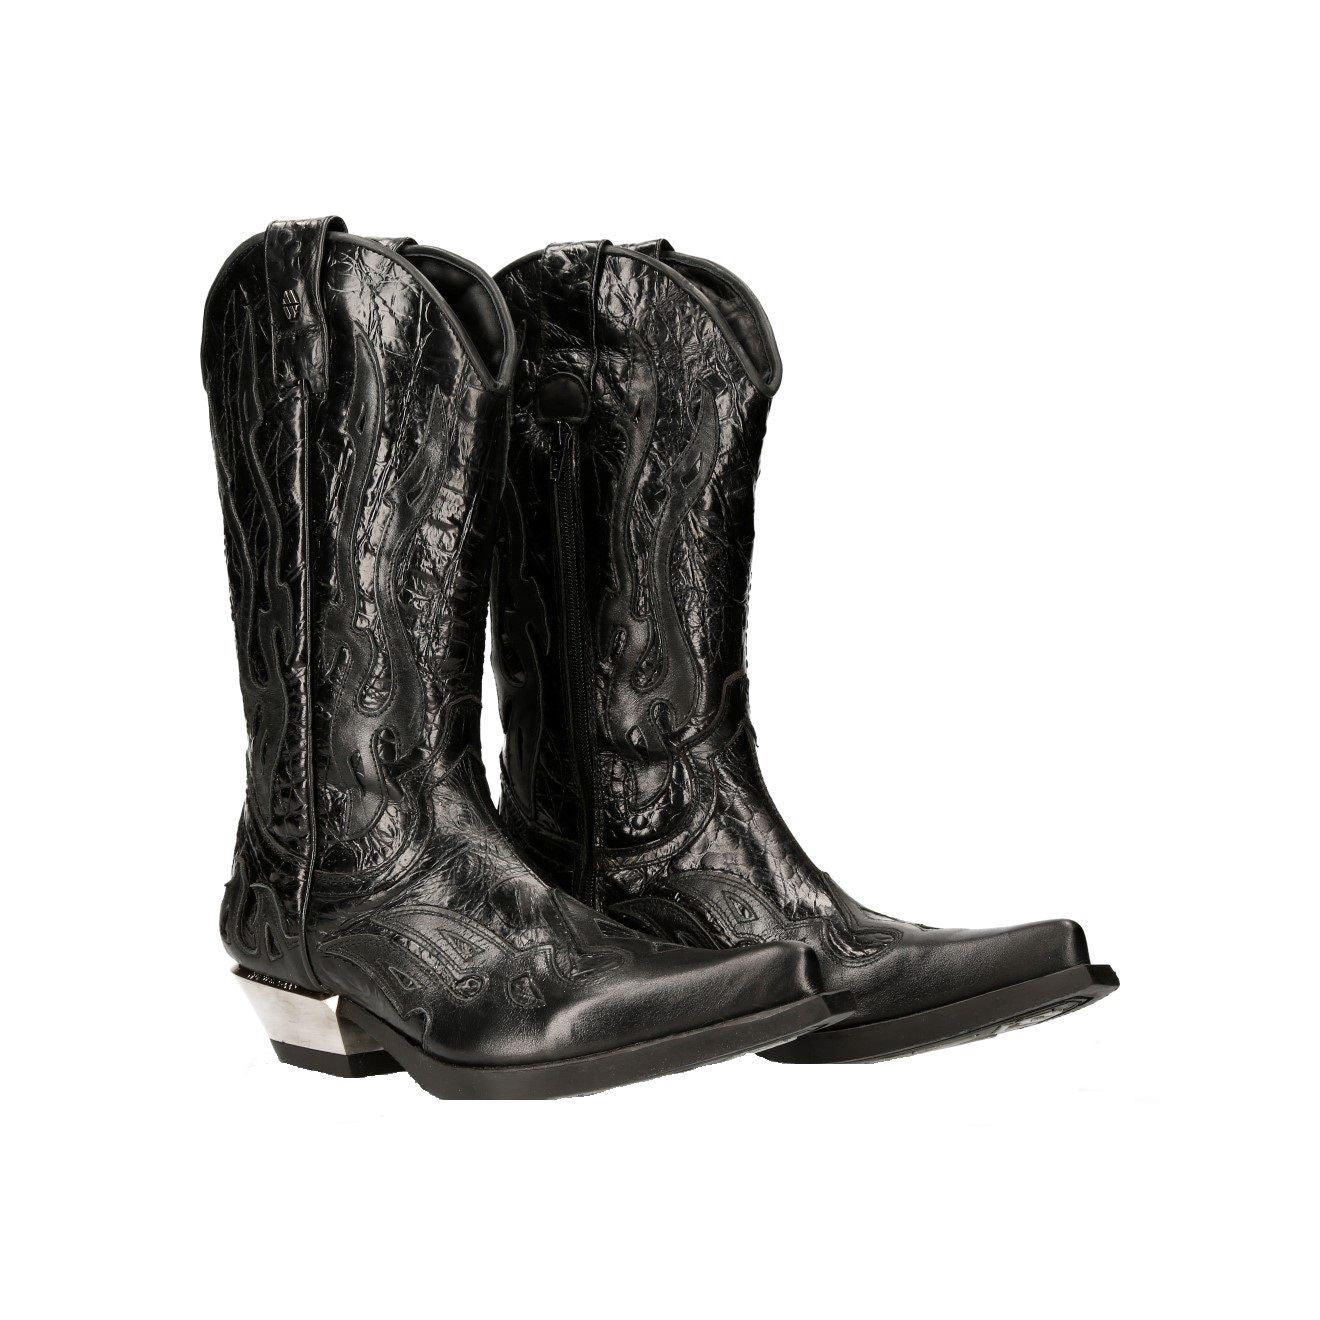 New Rock Flame Accented Black Leather Biker Cowboy Boots- M-7921-S1 - Upperclass Fashions 